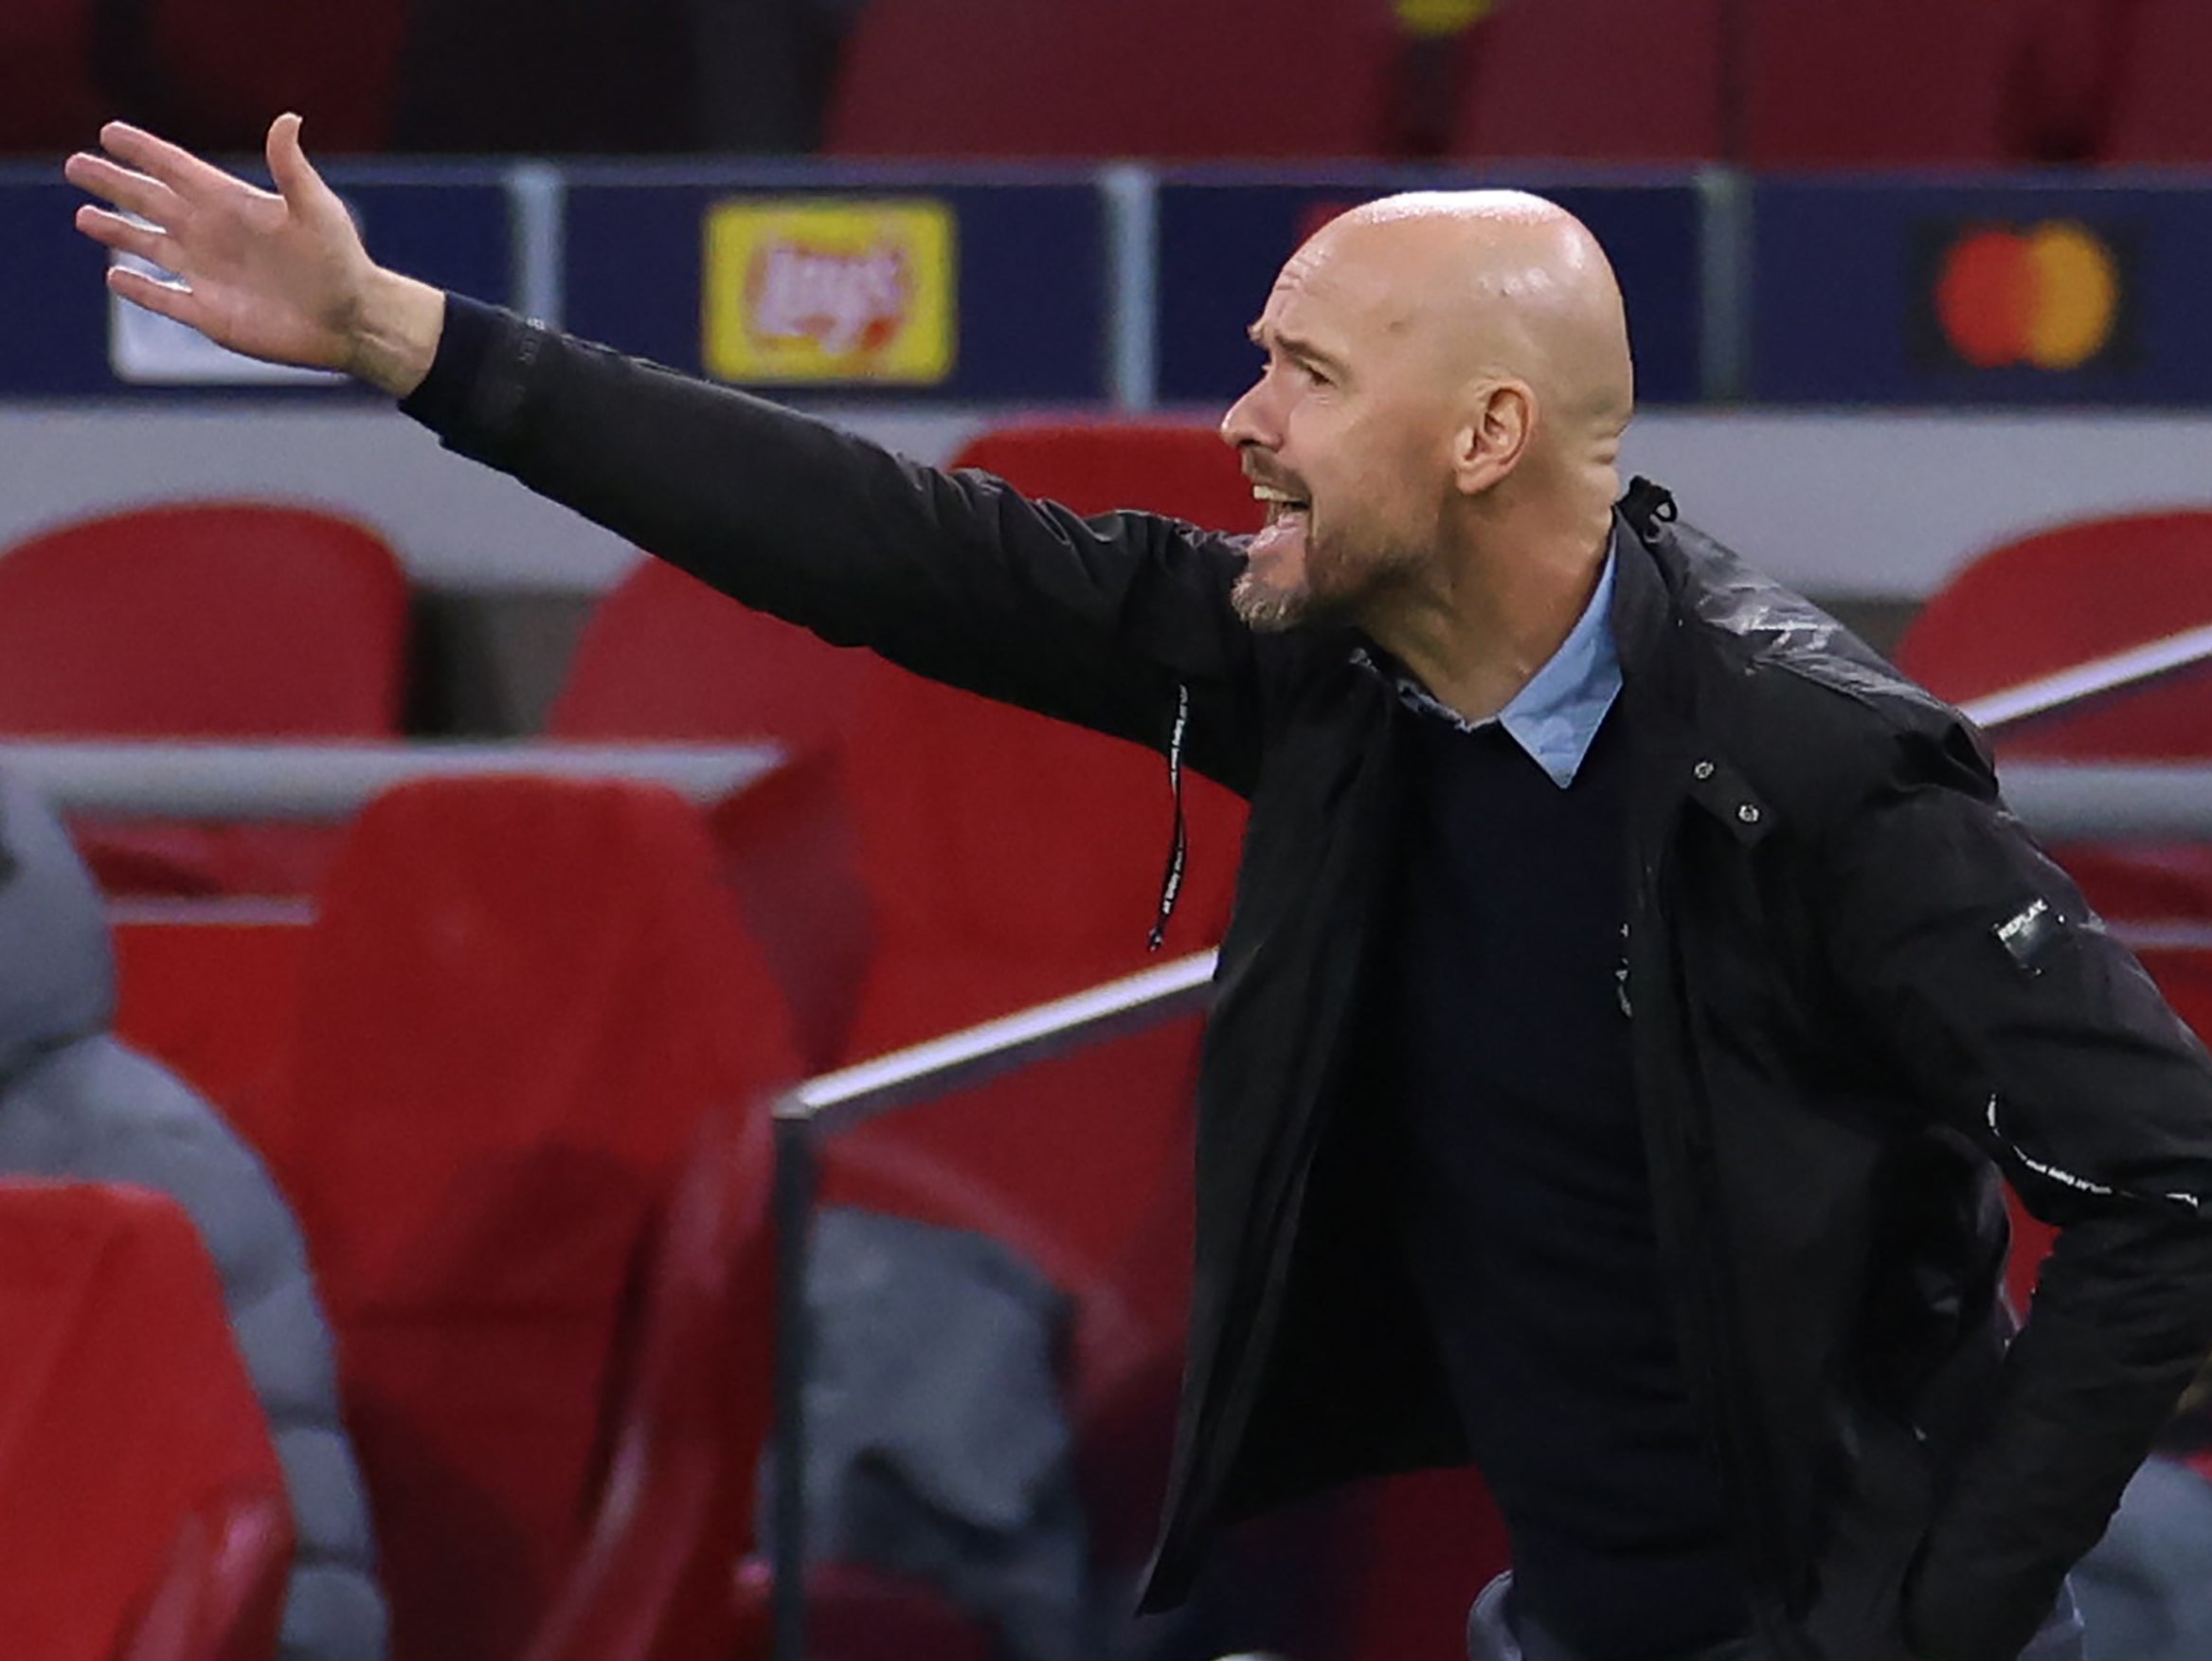 Ajax coach Erik ten Hag will have a limited squad to work with